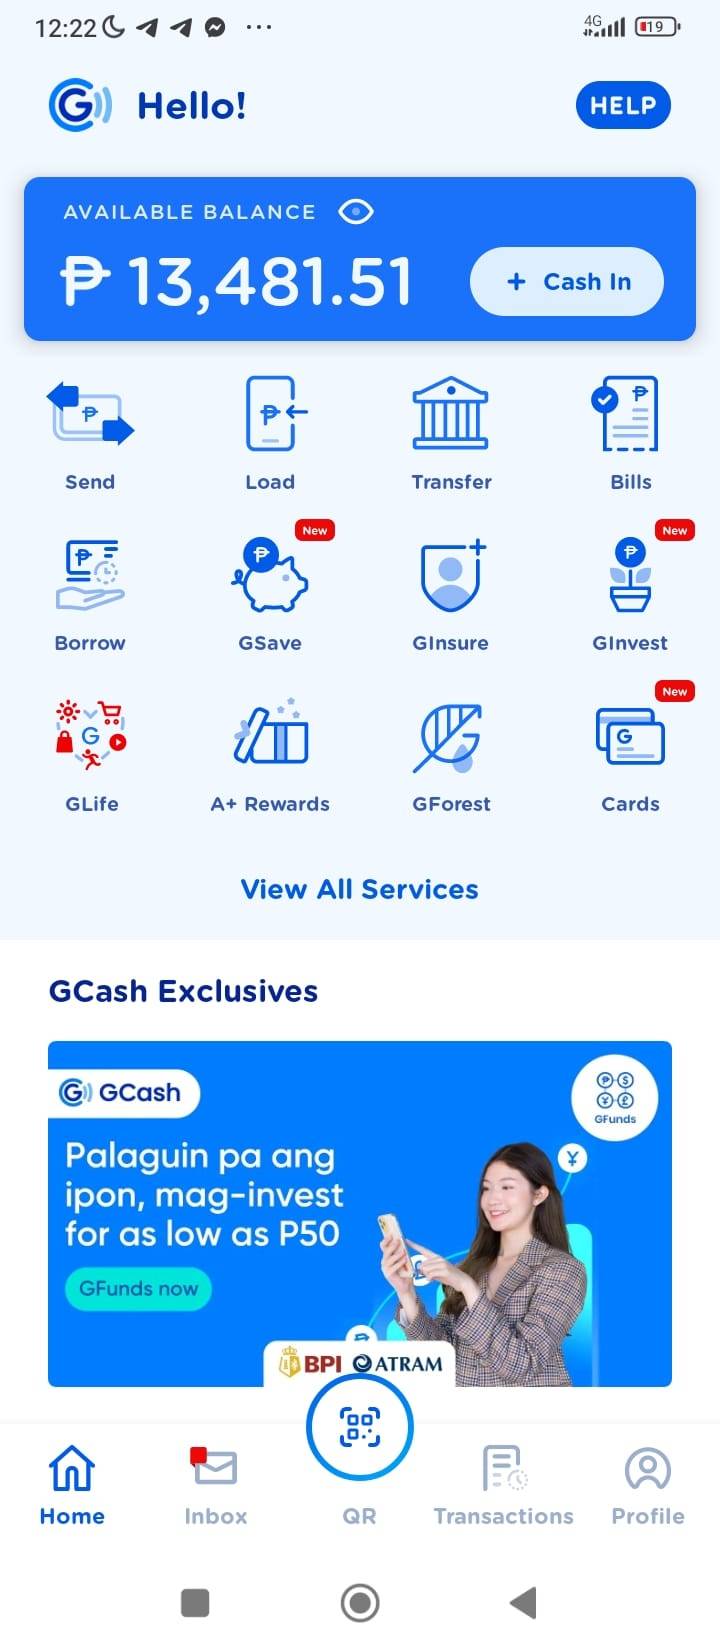 May be an image of ‎1 person and ‎text that says ‎12:22 G) Hello! HELP AVAILABLE BALANCE P 13,481.51 Cash In Send Load Transfer New Bills Borrow GSave Ginsure Ginvest New GLife A+ Rewards GForest Cards View All Services GCash Exclusives G GCash စိစ :: GFunds Palaguin pa ang ipon, mag-invest for as low as P50 GFundsnow BPI ATRAM زی Home Inbox QR Transactions Profile‎‎‎